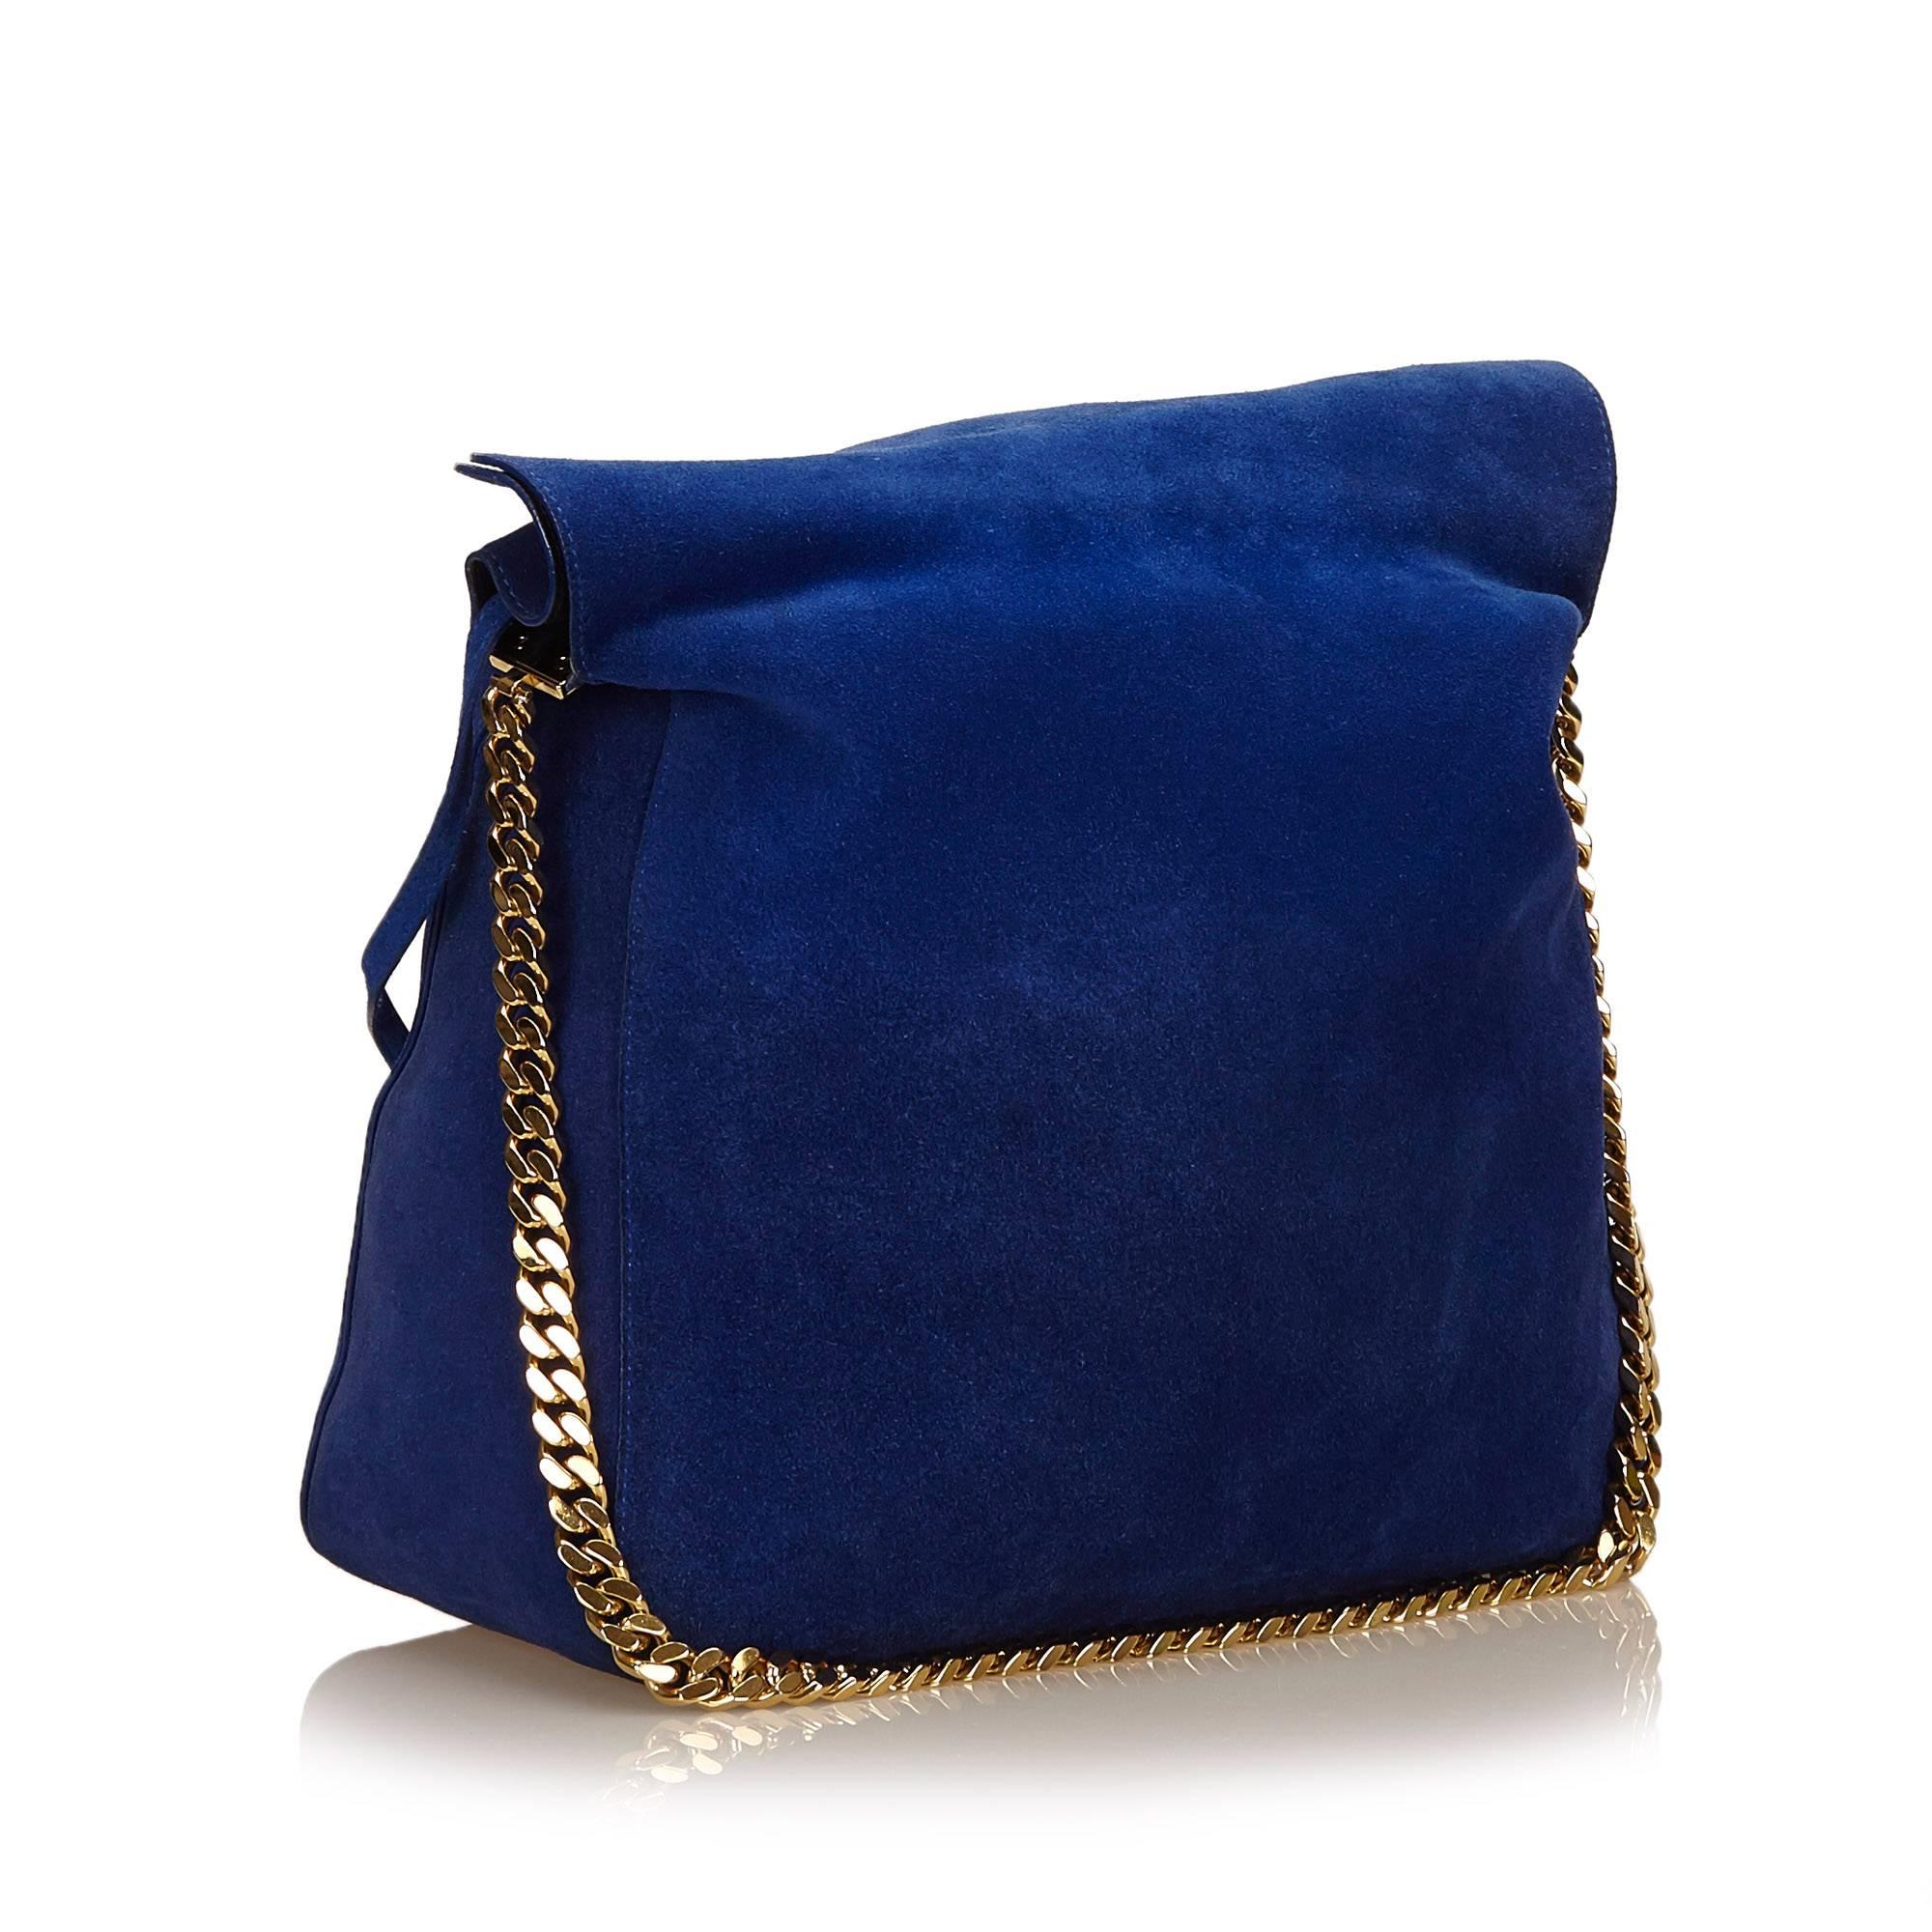 The Gourmette Bag features a suede leather body, gold-tone shoulder chain, and a flap top.

It carries a B+ condition rating.

Dimensions: 
Length 30 cm
Width 32 cm
Depth 14 cm
Shoulder Drop 35 cm

Inclusions: Pouch

Color: Blue

Material: Leather x